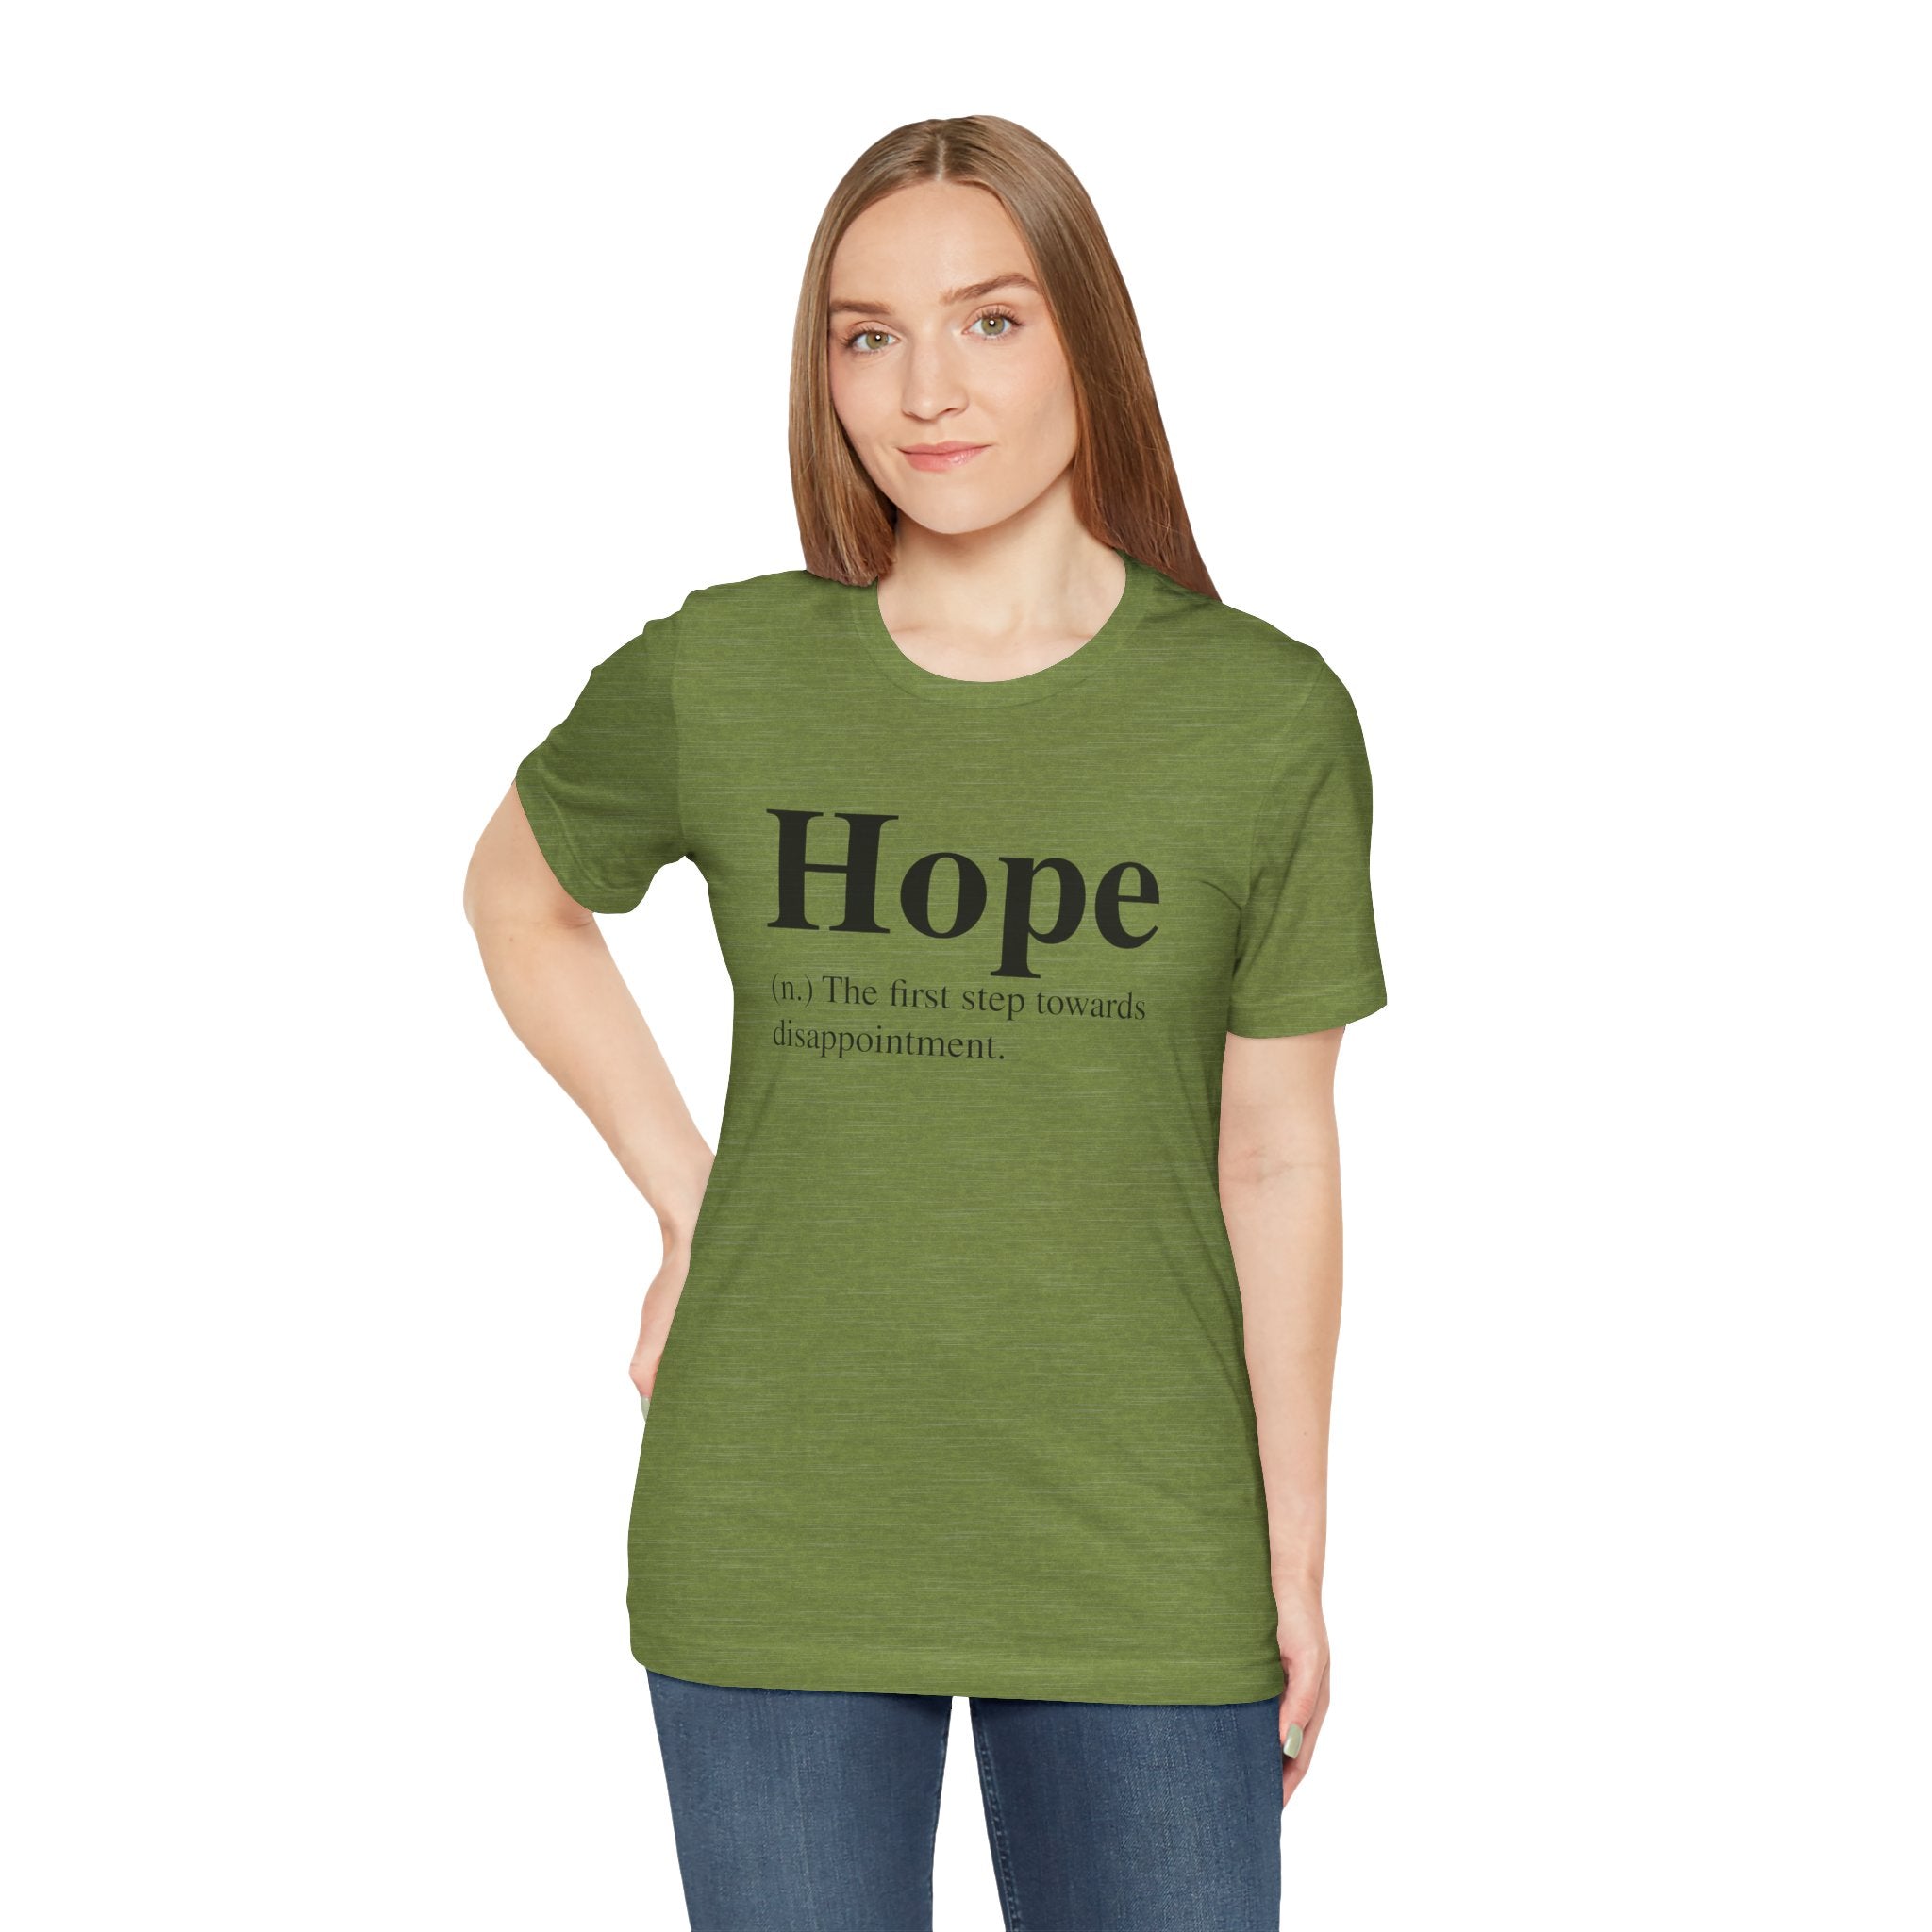 Sentence with replaced product name: Young woman wearing a green unisex Hope T-shirt with the word "hope" followed by a cynical definition printed on it.